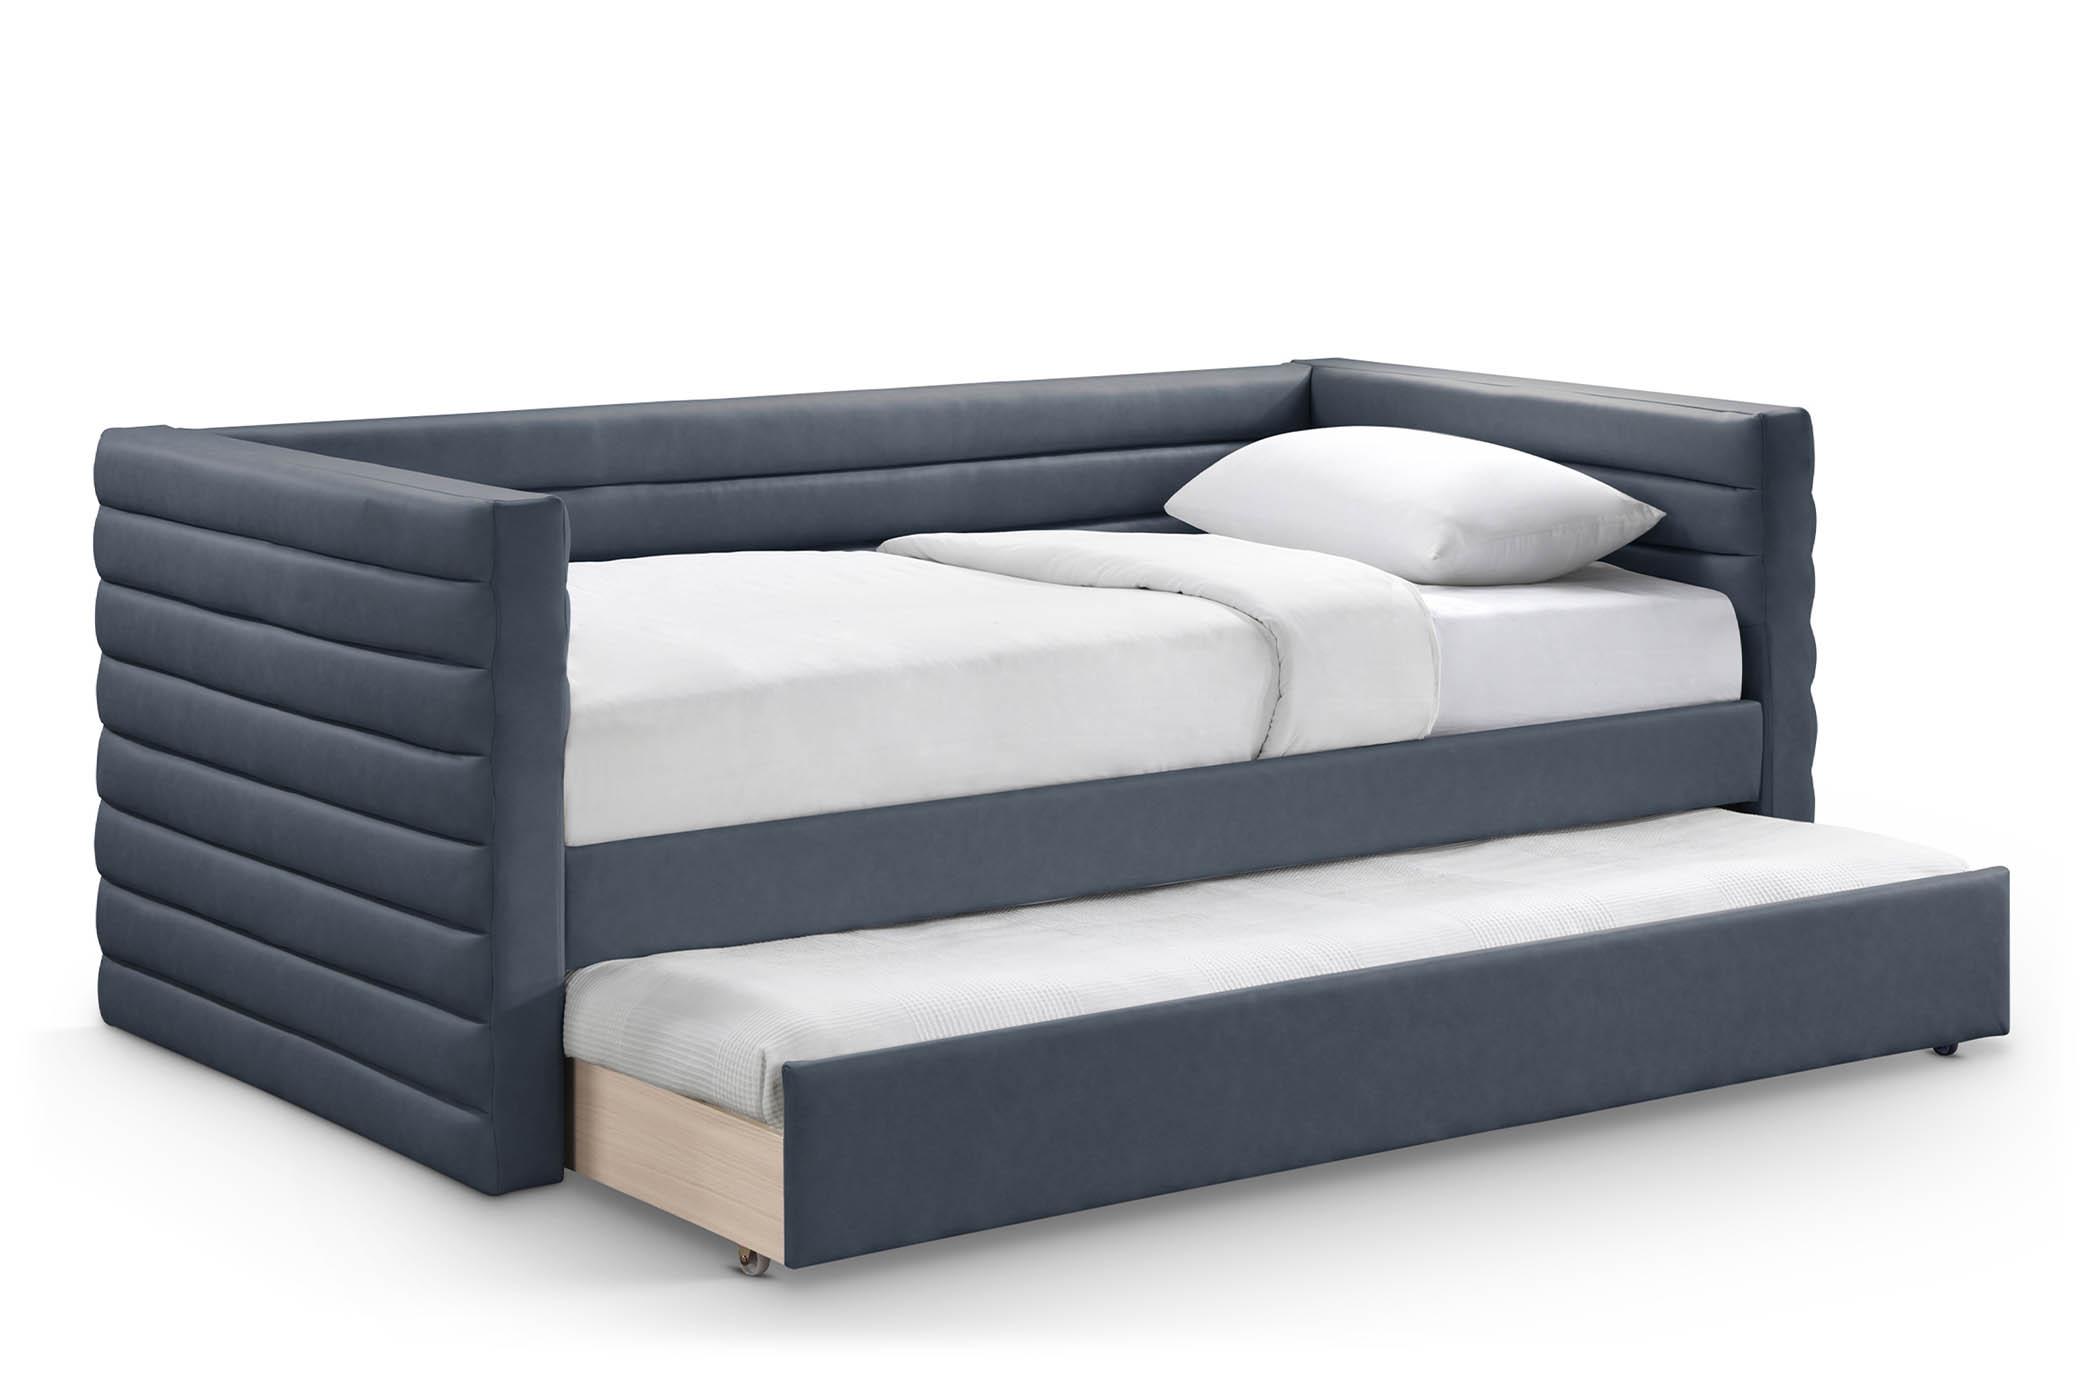 Contemporary, Modern Daybed BeverlyNavy-T BeverlyNavy-T in Navy Faux Leather